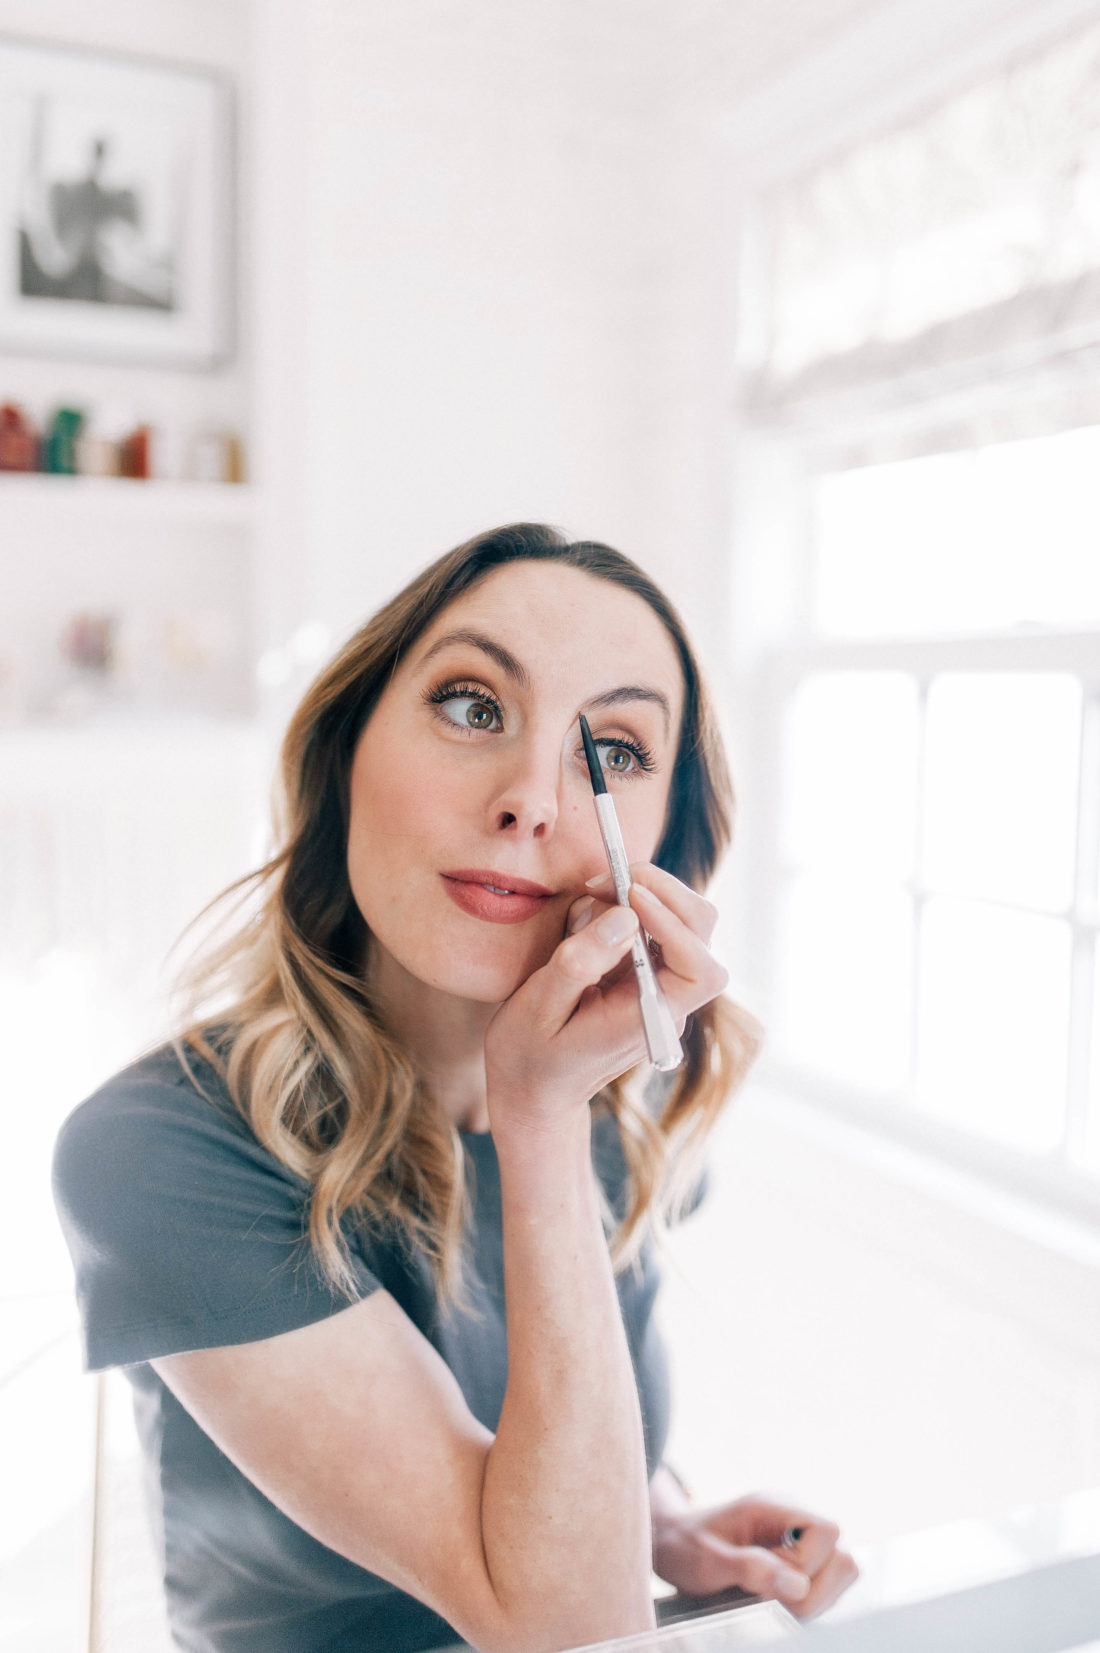 Eva Amurri Martino uses Benefit's Precisely Brow pencil to fill in here eyebrows